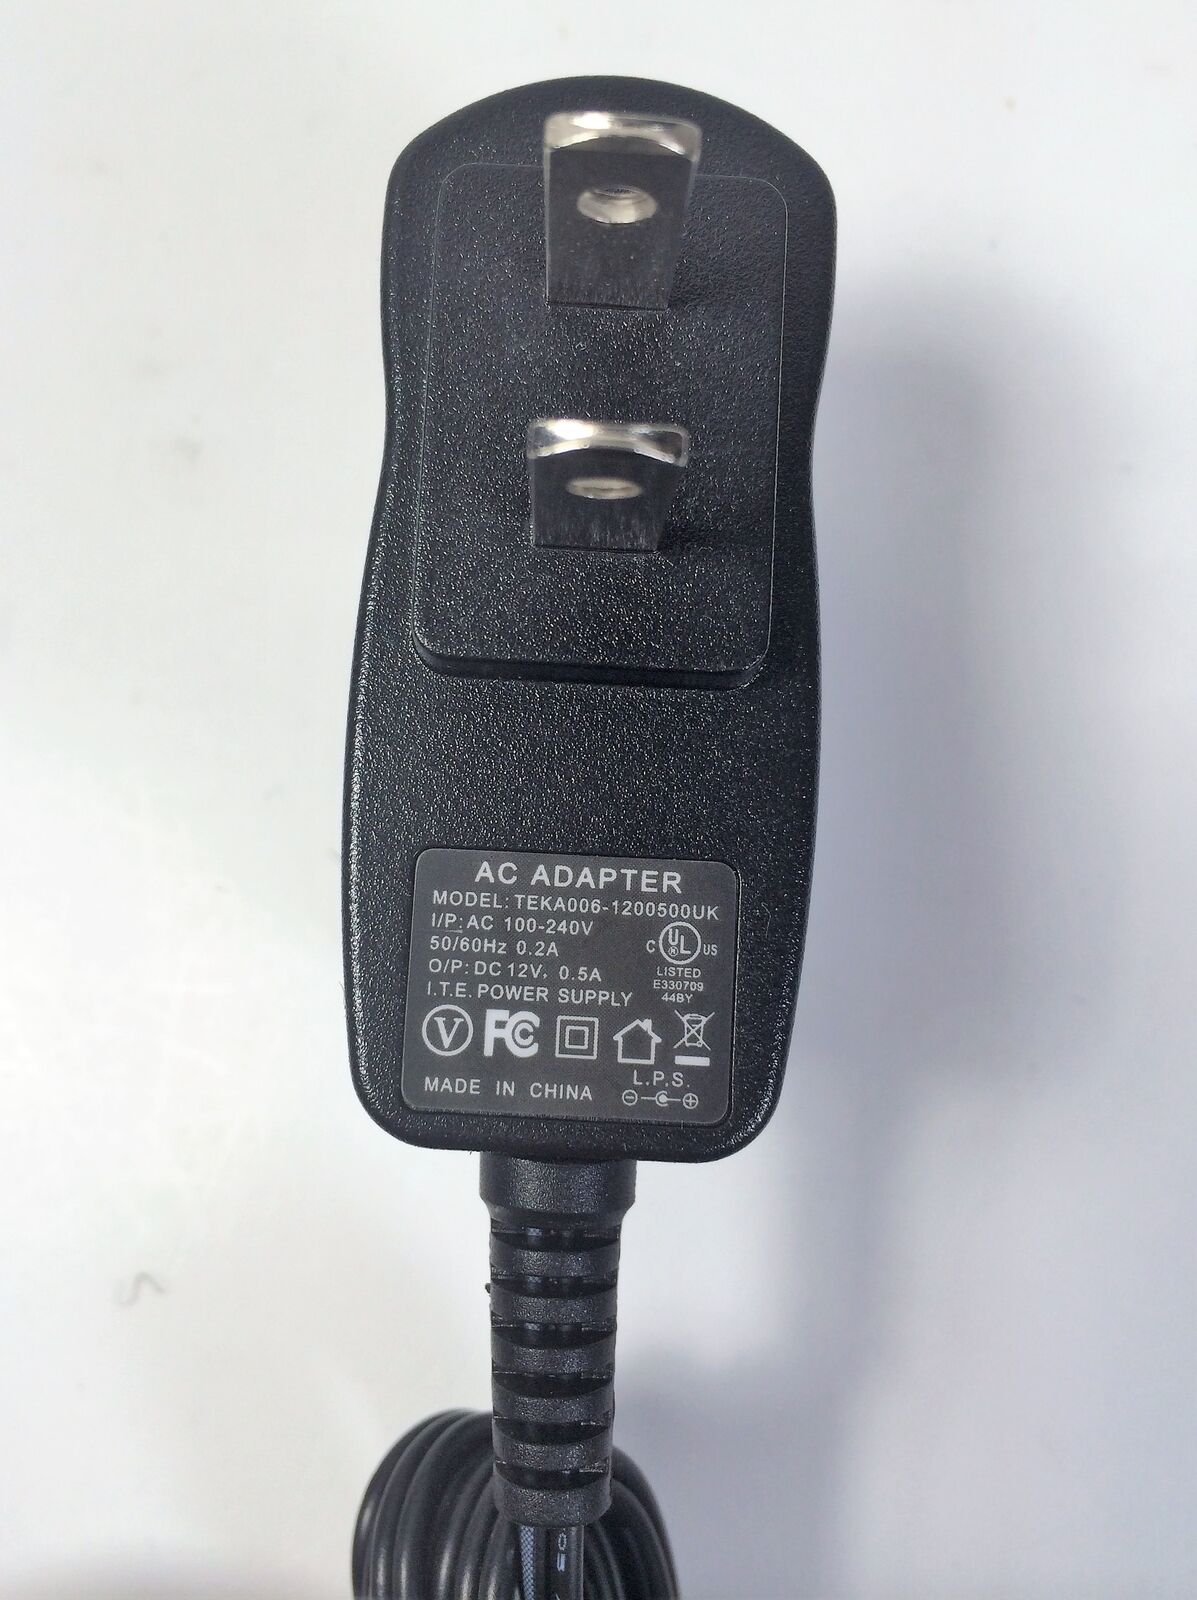 Brand New 12V DC 0.5A AC Adapter for TEKA006-1200500UK power supply - Click Image to Close